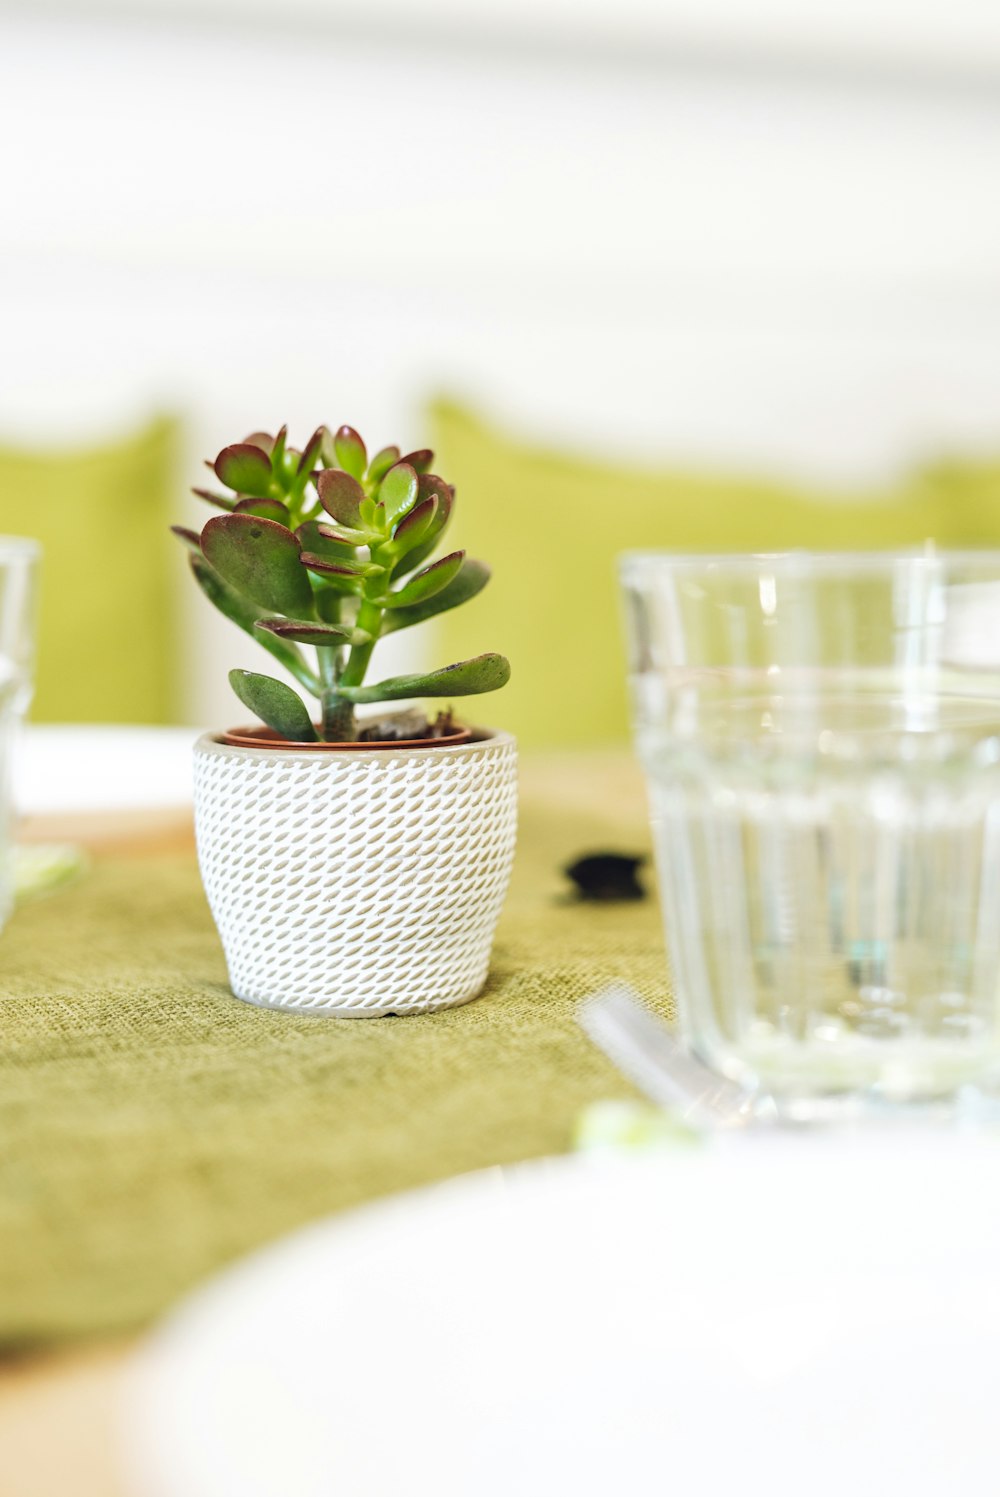 green plant in white ceramic vase beside clear drinking glass